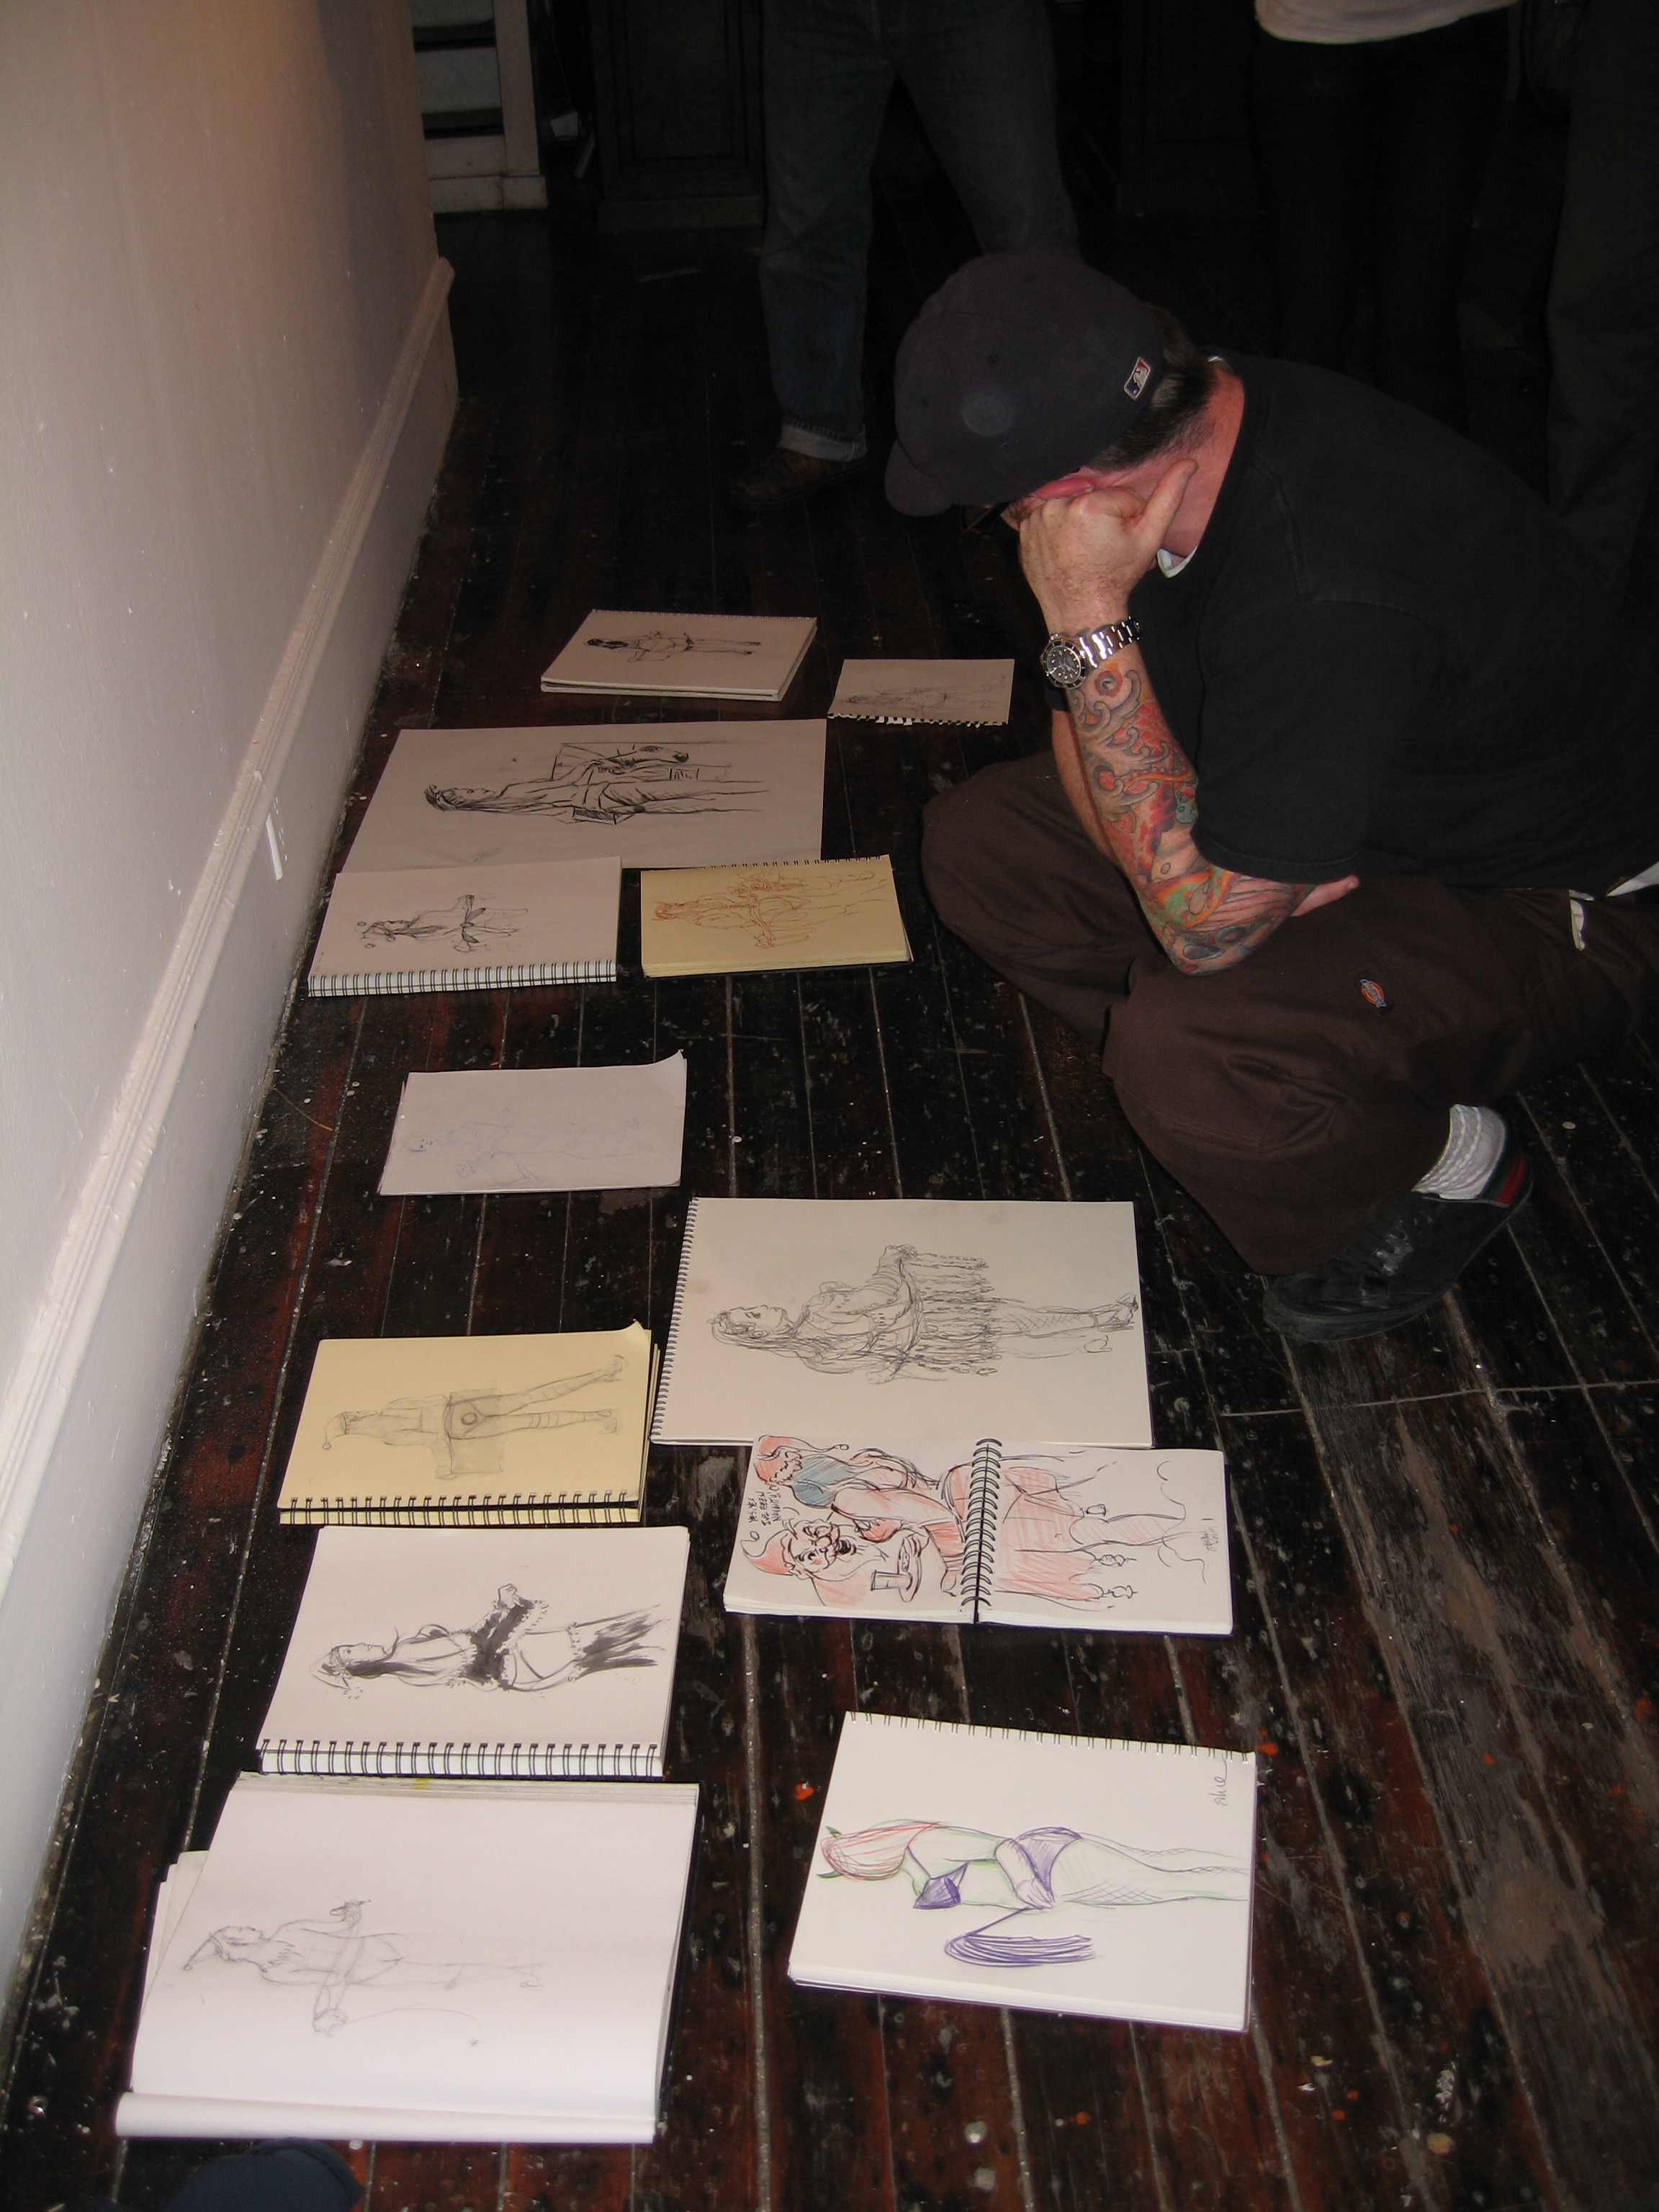 justin reviewing dr. sketchy's work